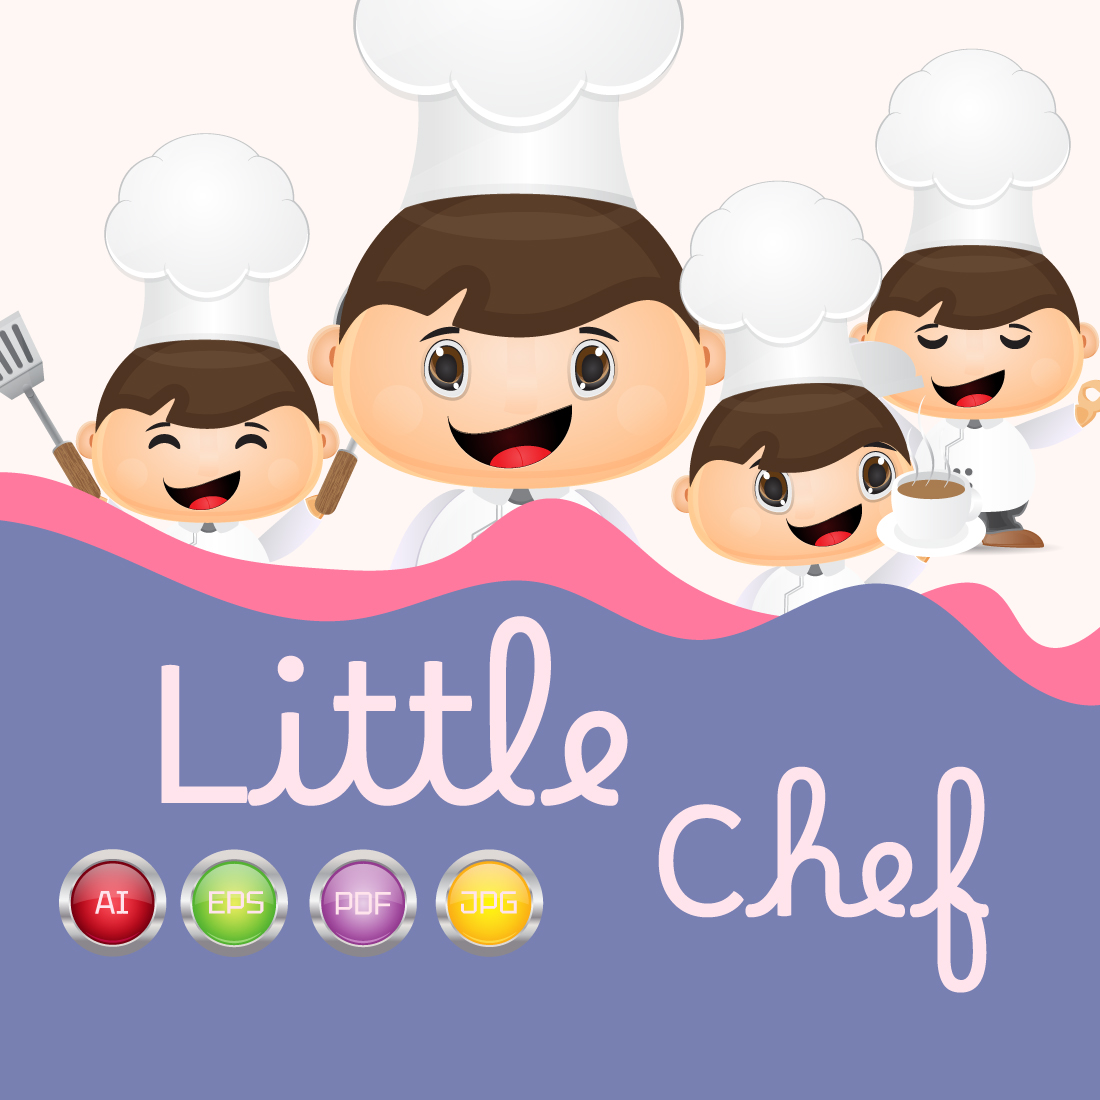 Cute chef cartoon in various poses cover image.